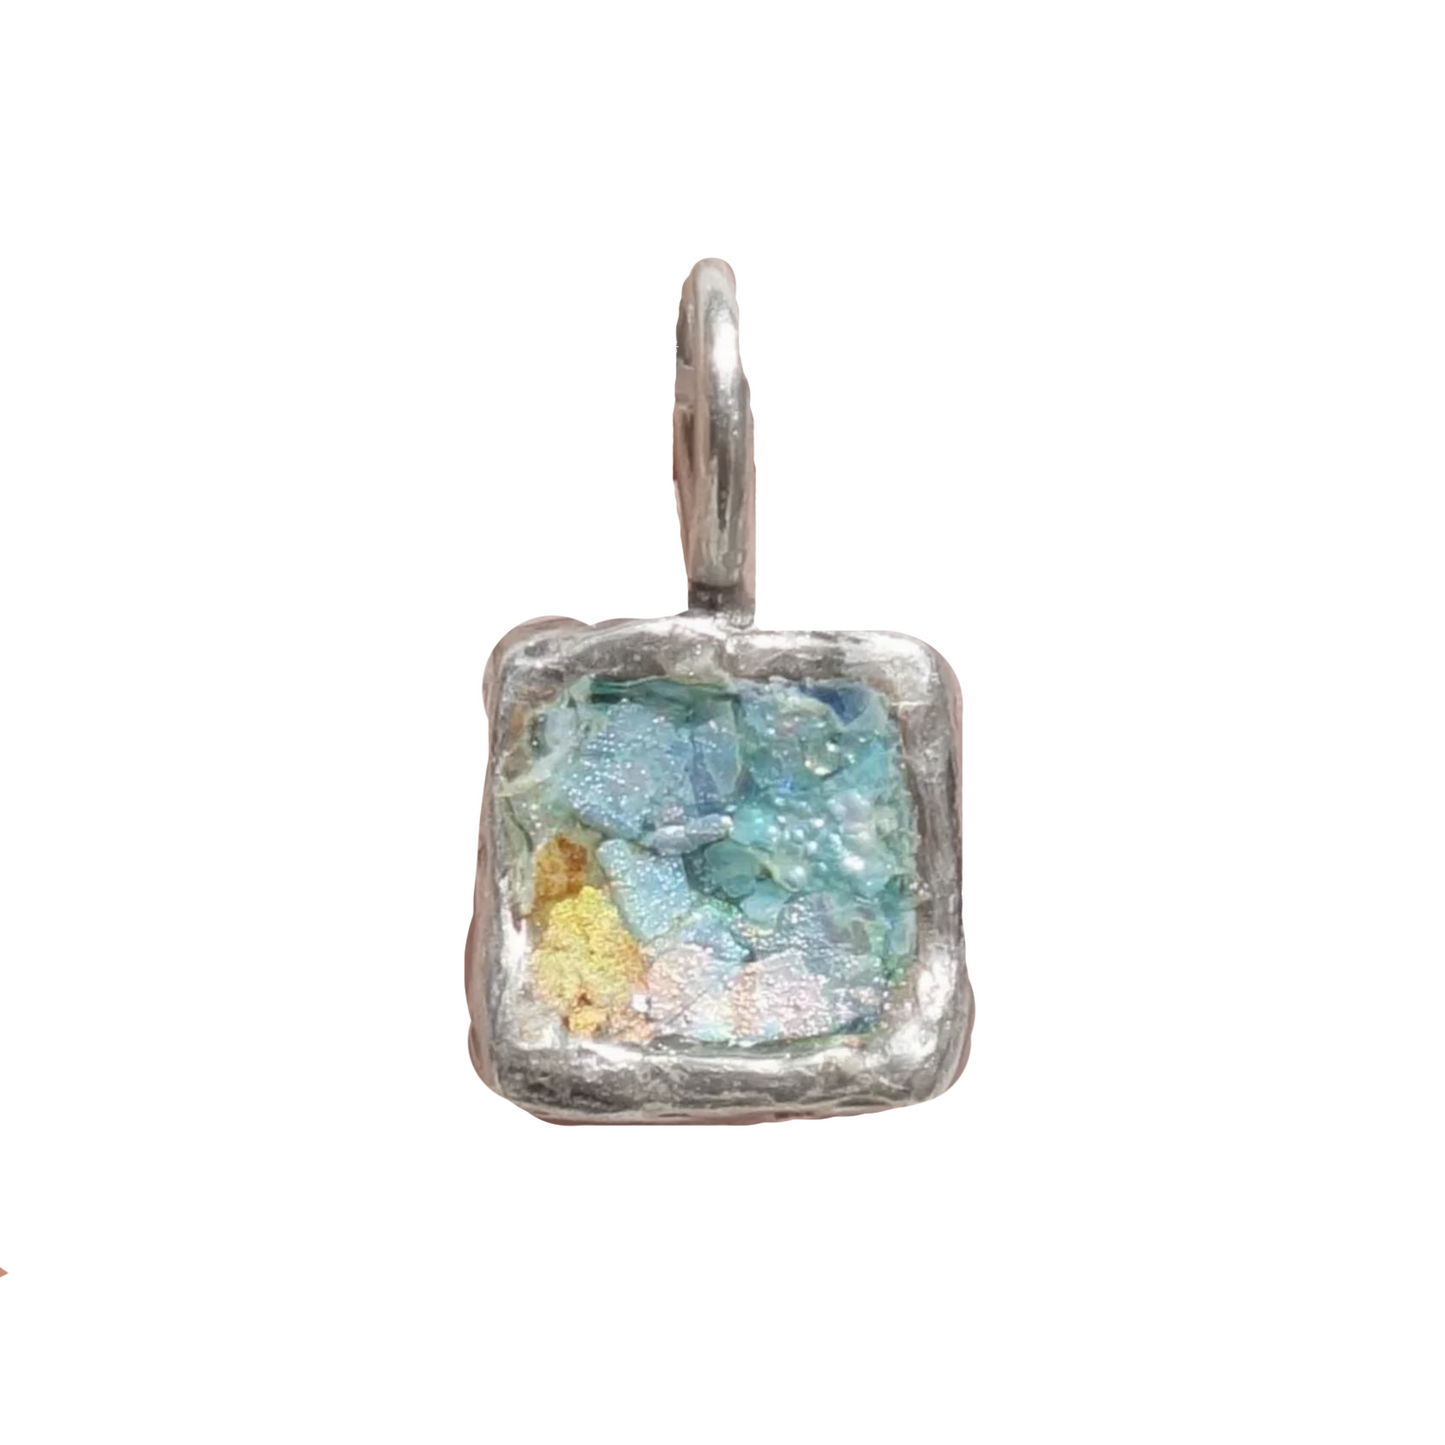 Roman Glass Pendent, Silver pendant withsquare Genuine antique 2000 years old Roman Glass.